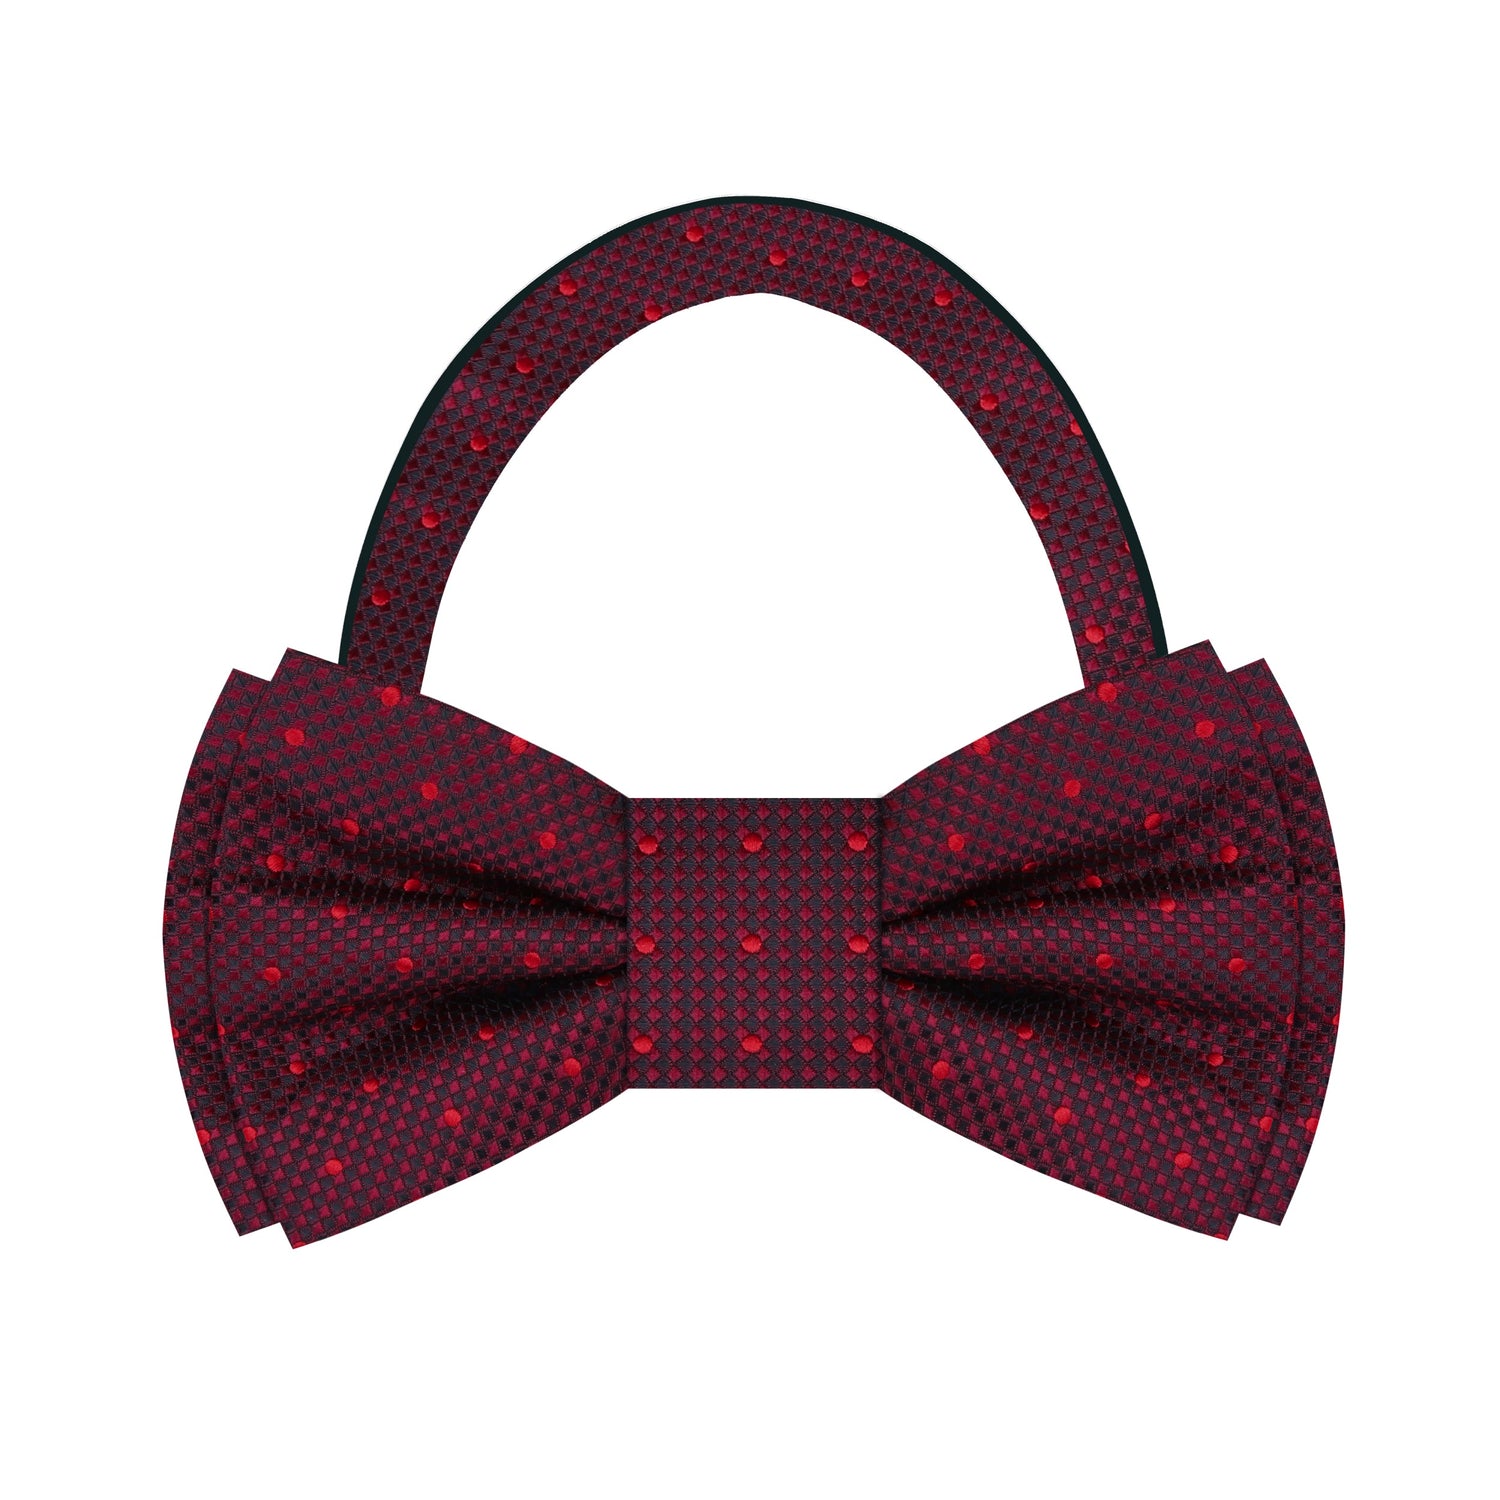 Pre Tied: Shades of red geometric bow tie with polka accents,